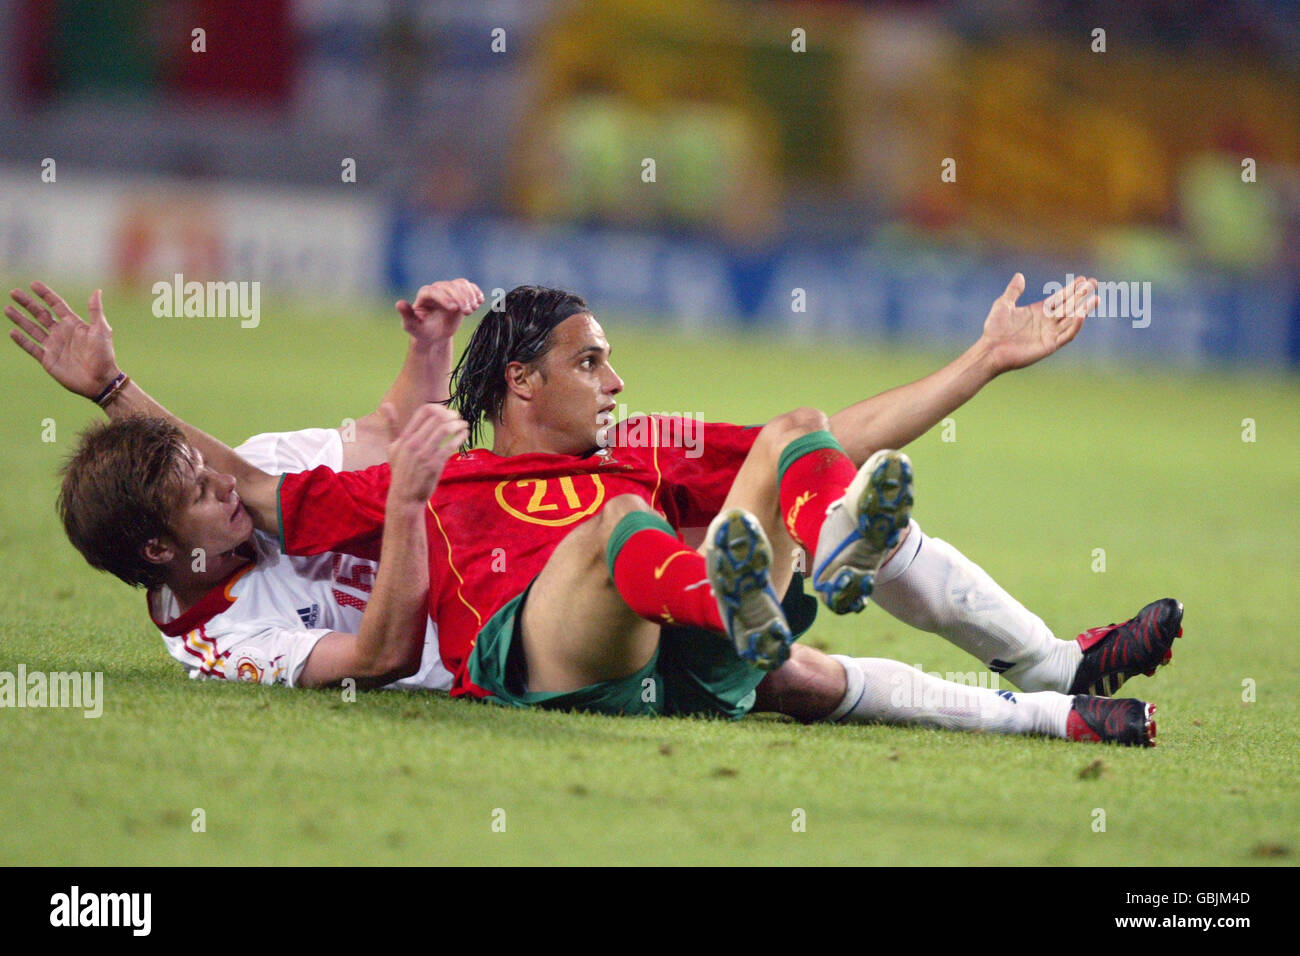 Soccer - UEFA European Championship 2004 - Group A - Spain v Portugal. Portugal's Nuno Gomes appeals for a free kick after being pulled to the floor by Spain's Xabi Alonso Stock Photo